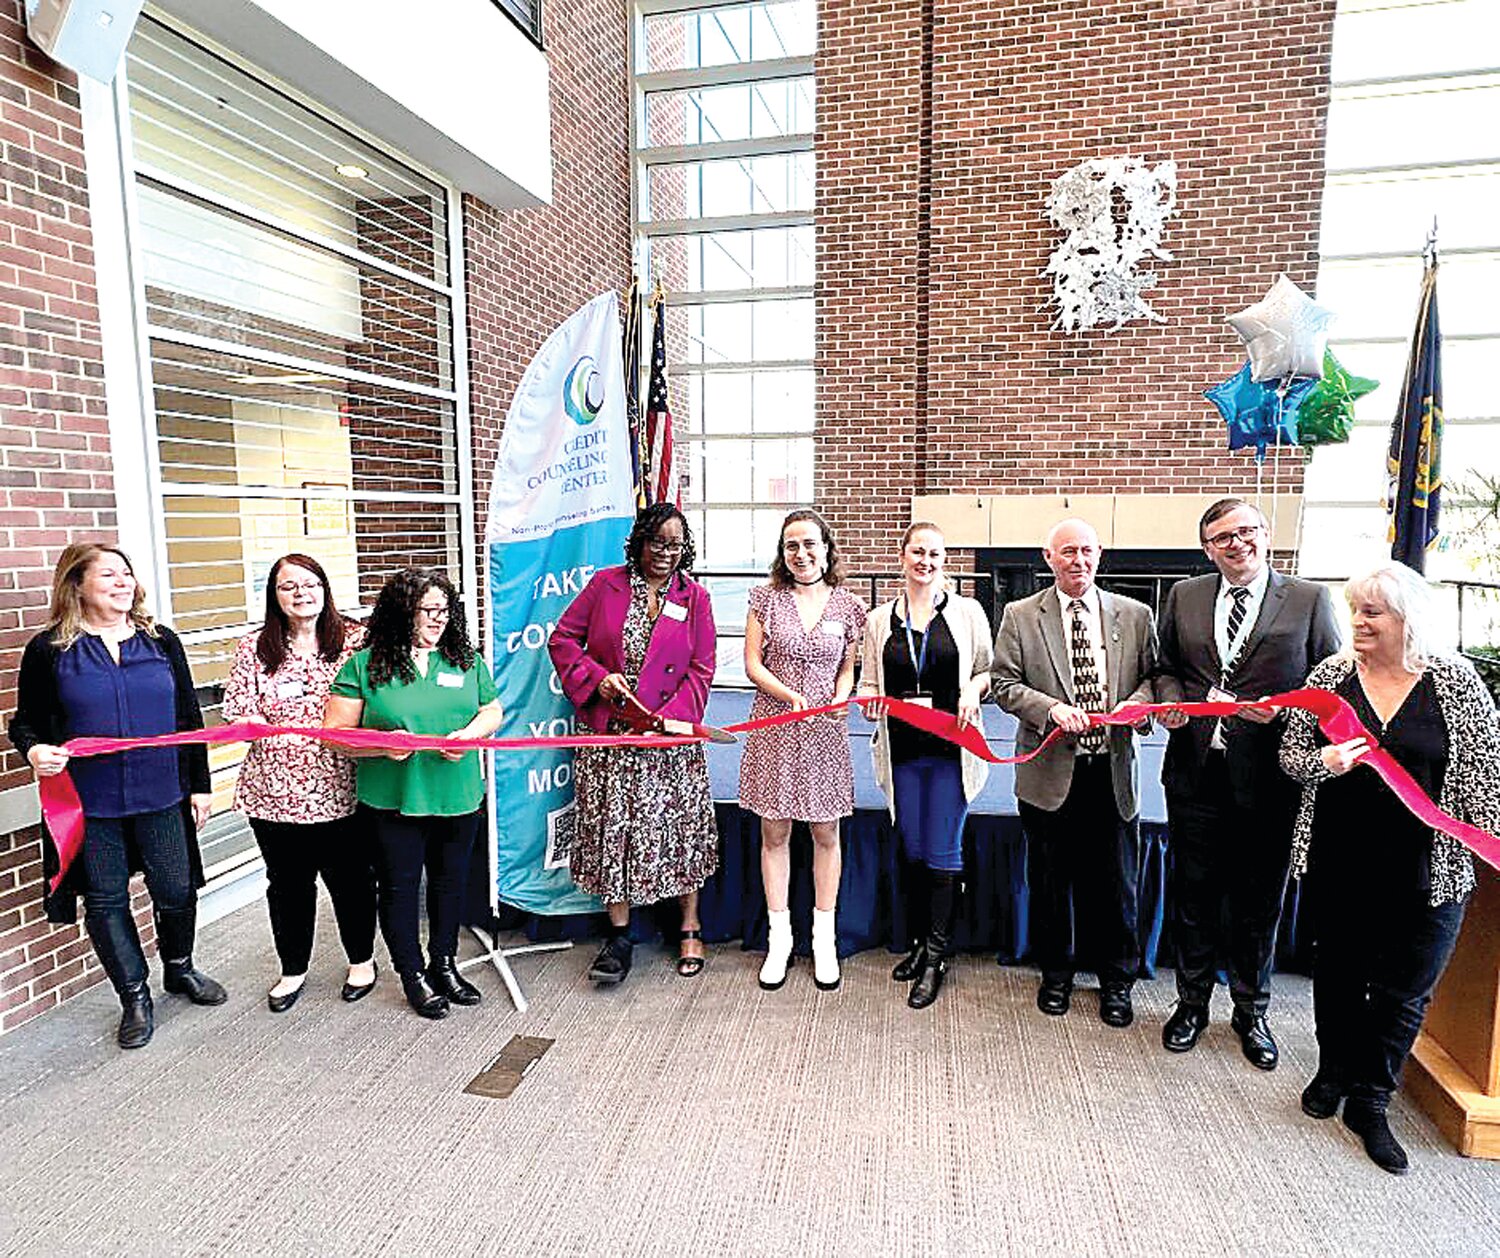 From left: Paula Powers-Watts, executive director of Credit Counseling Center cuts the official red ribbon in celebration of CCC’s new office at the Epstein Campus at Lower Bucks - Bucks County Community College, with Rep. Tina Davis, Jennifer Doyle, Rosa Reyes Santiago, Paula Powers-Watts, Jamie Lehman, Laura Jones-Morales, James Sell (Executive Dean, BCCC), Jody Seutter (AVP Academic Affairs, BCCC), Rose Cooper (Director, Epstein Campus).